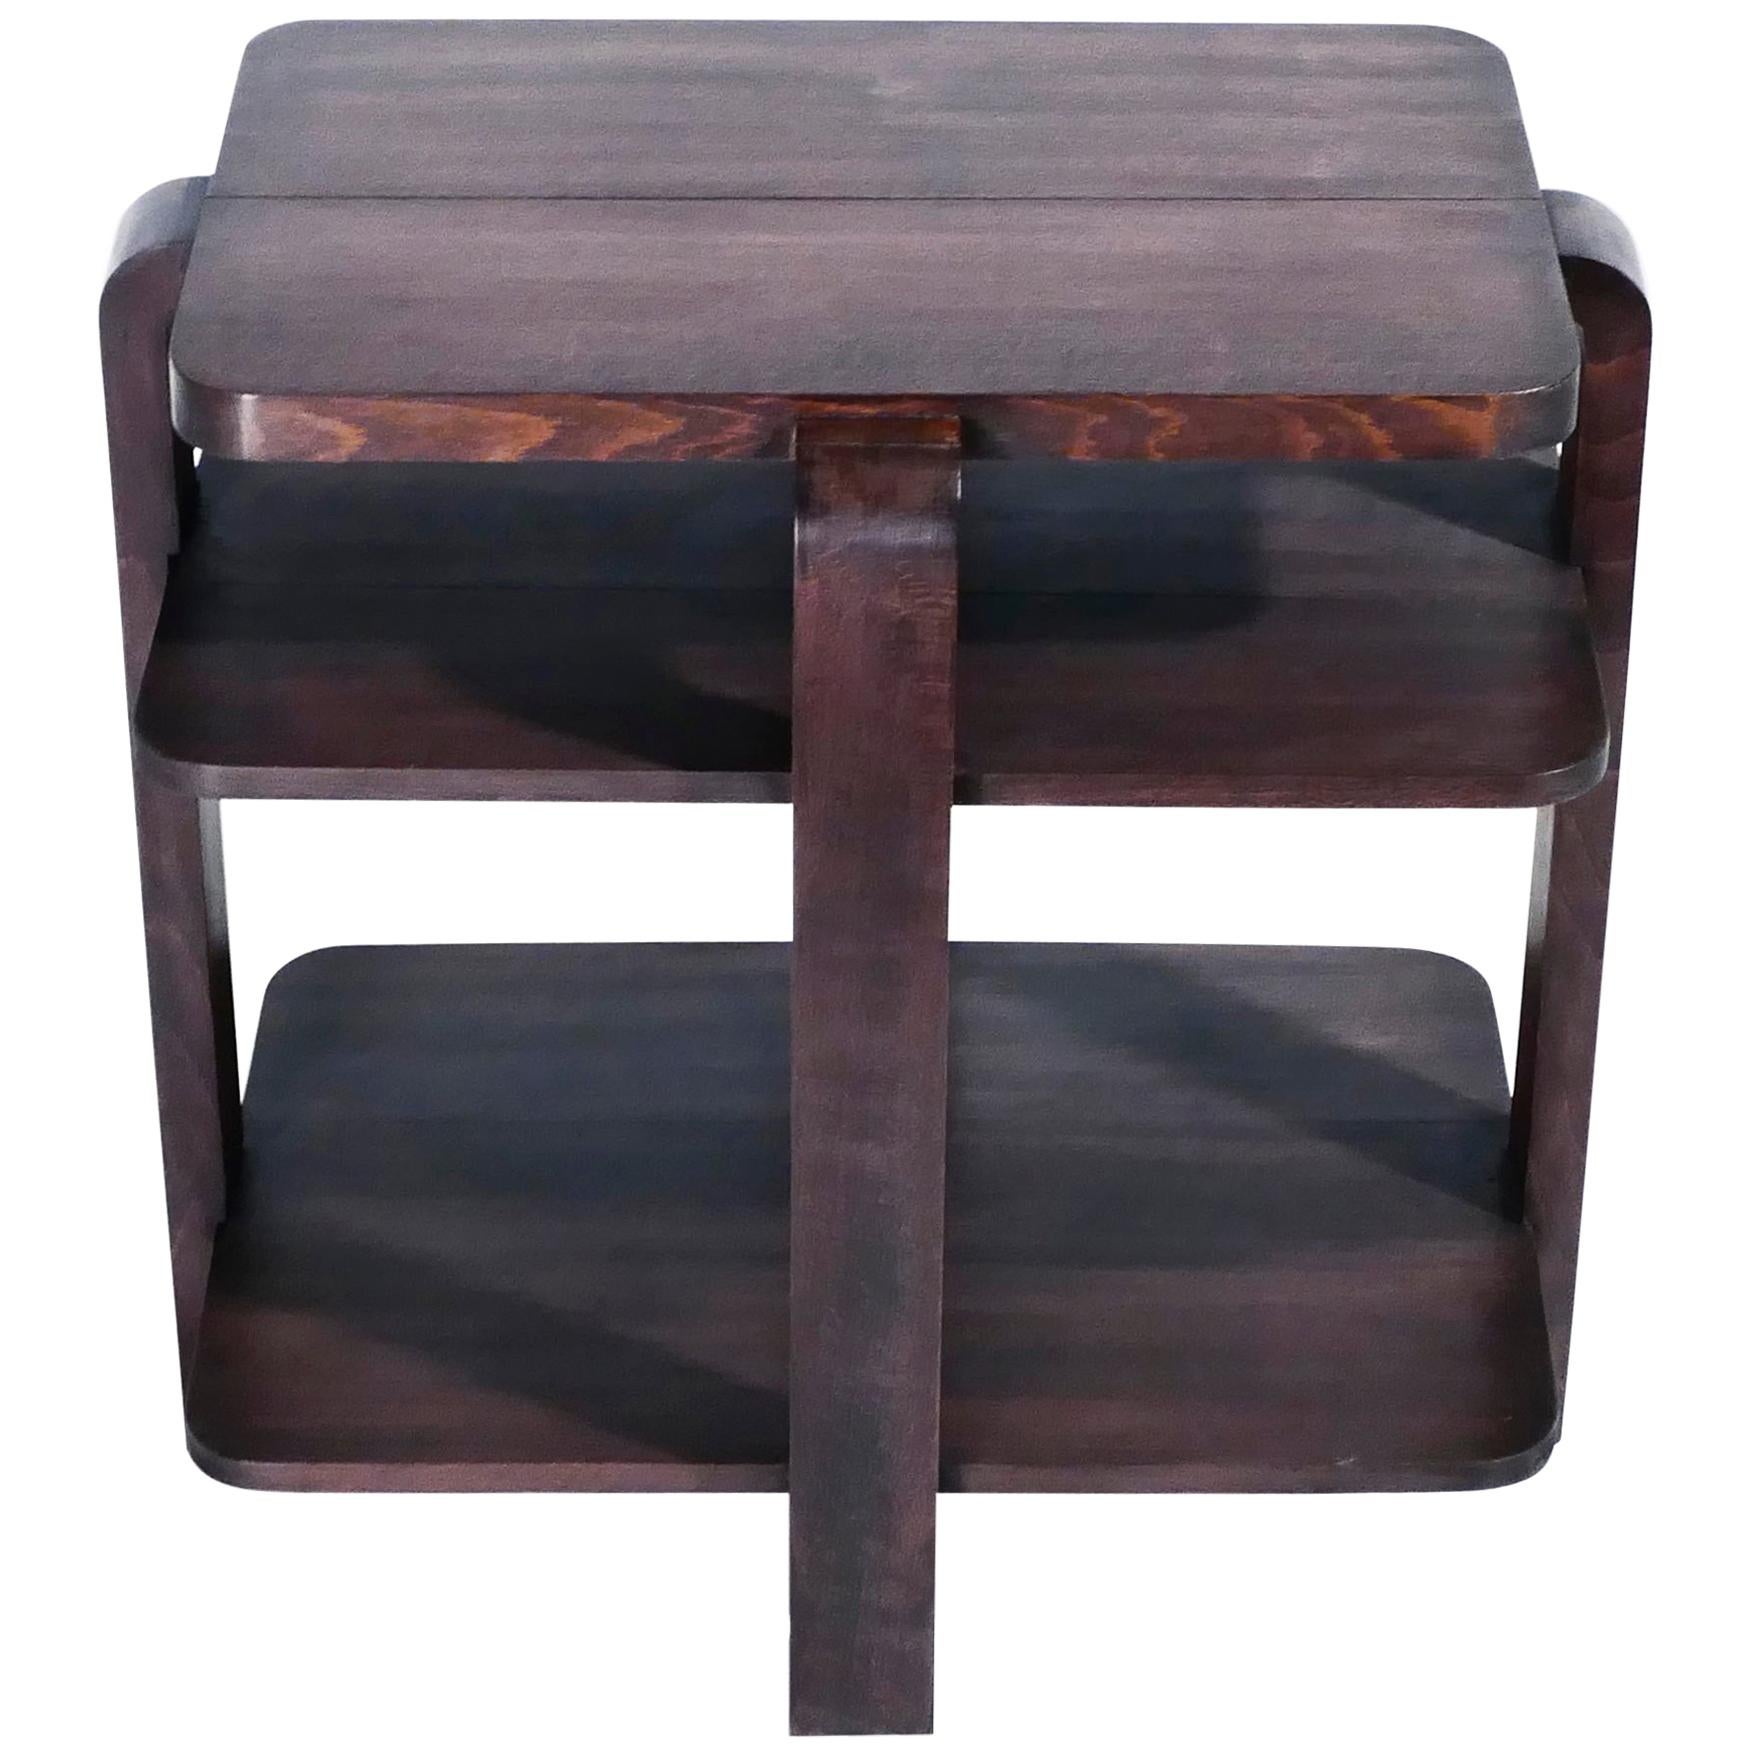 French Art Deco Modernist Mahogany Side Table, 1940s